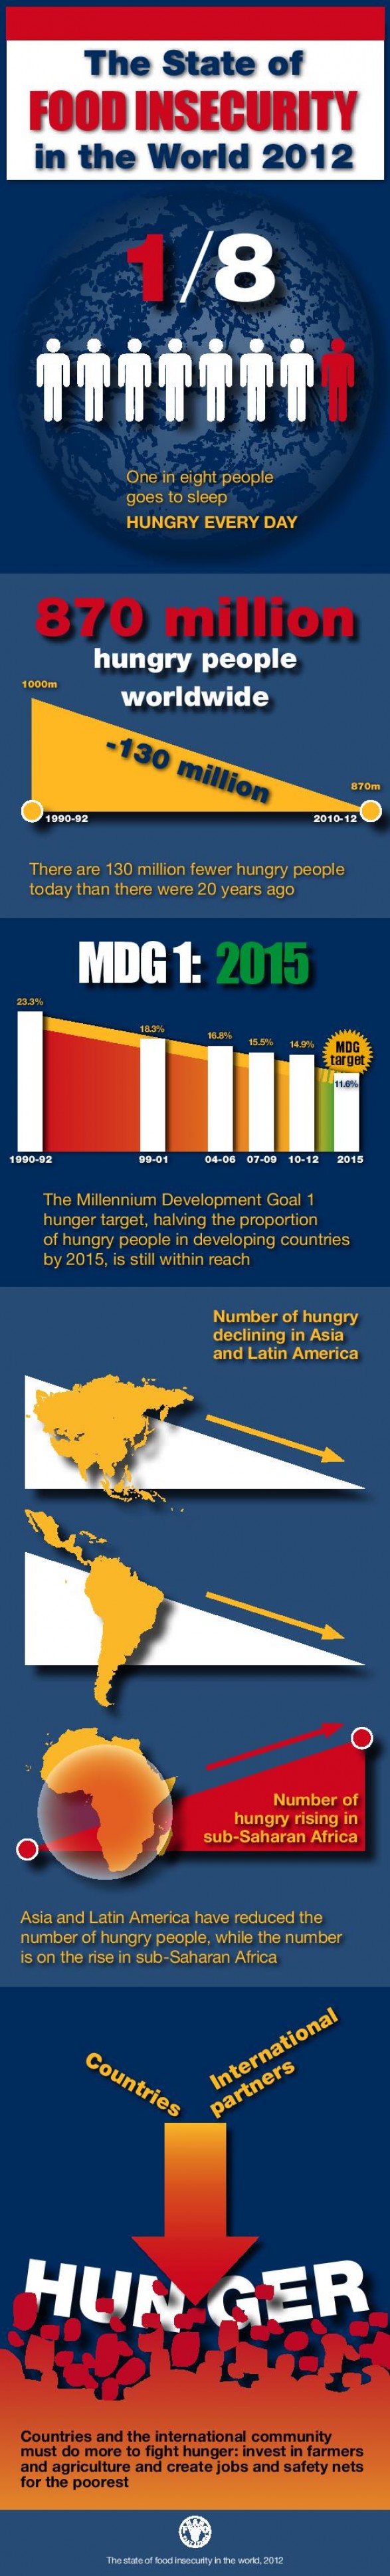 The State of Food Insecurity in the World 2012 